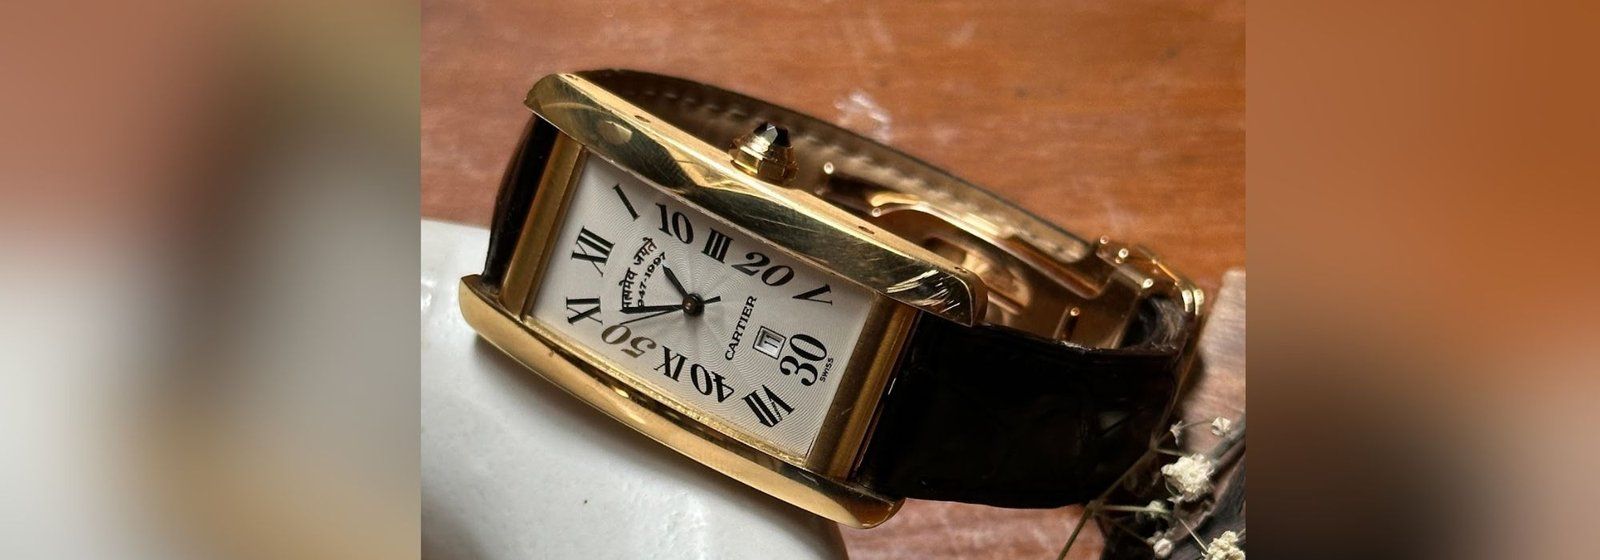 Cartier Tank Américaine: The Anatomy of an Icon and a Special India Connection